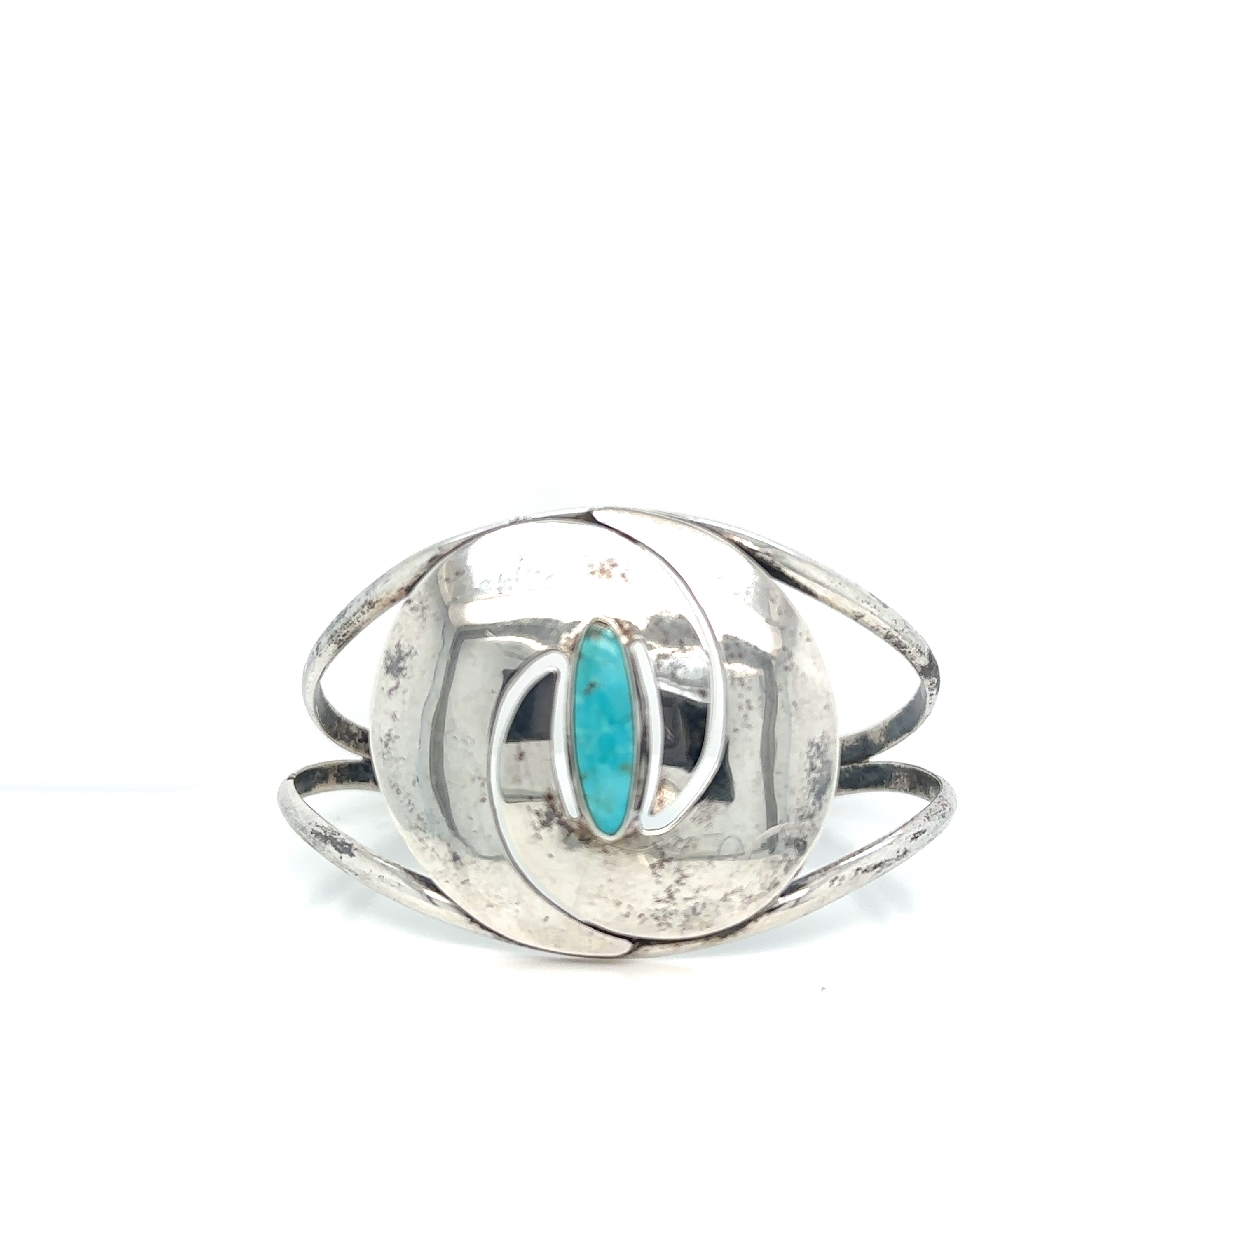 Sterling Silver Turquoise Cuff

